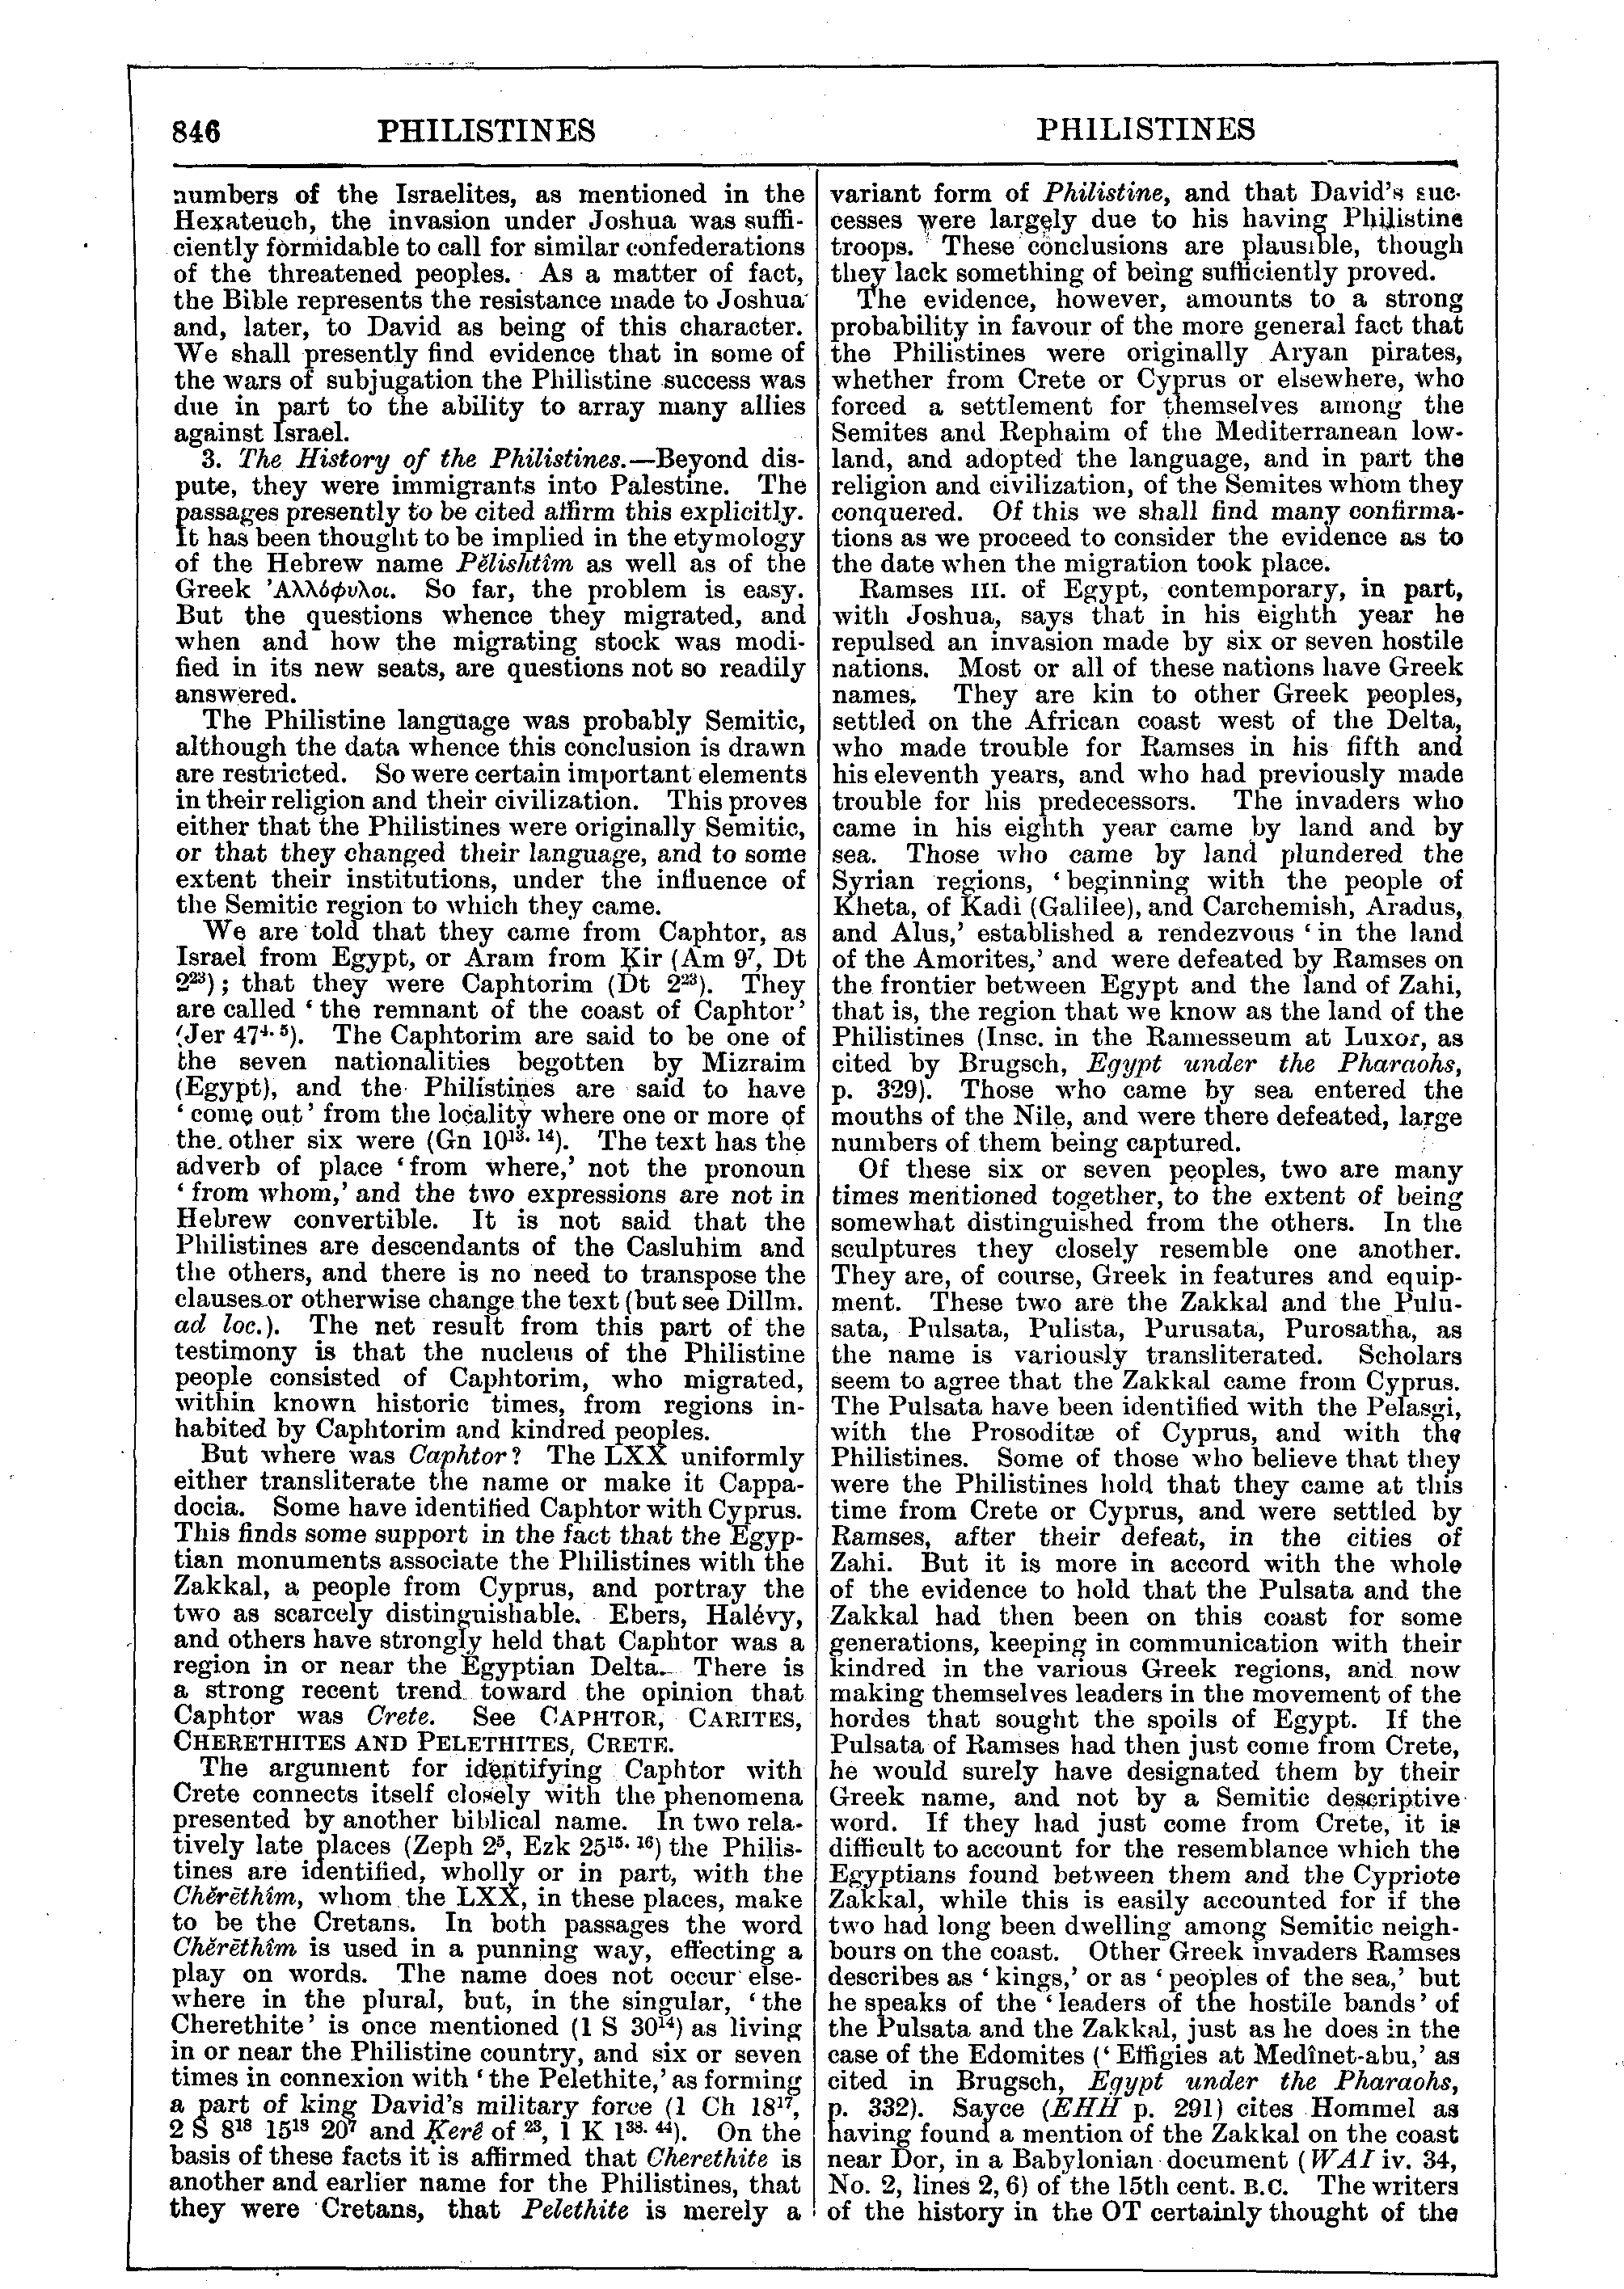 Image of page 846